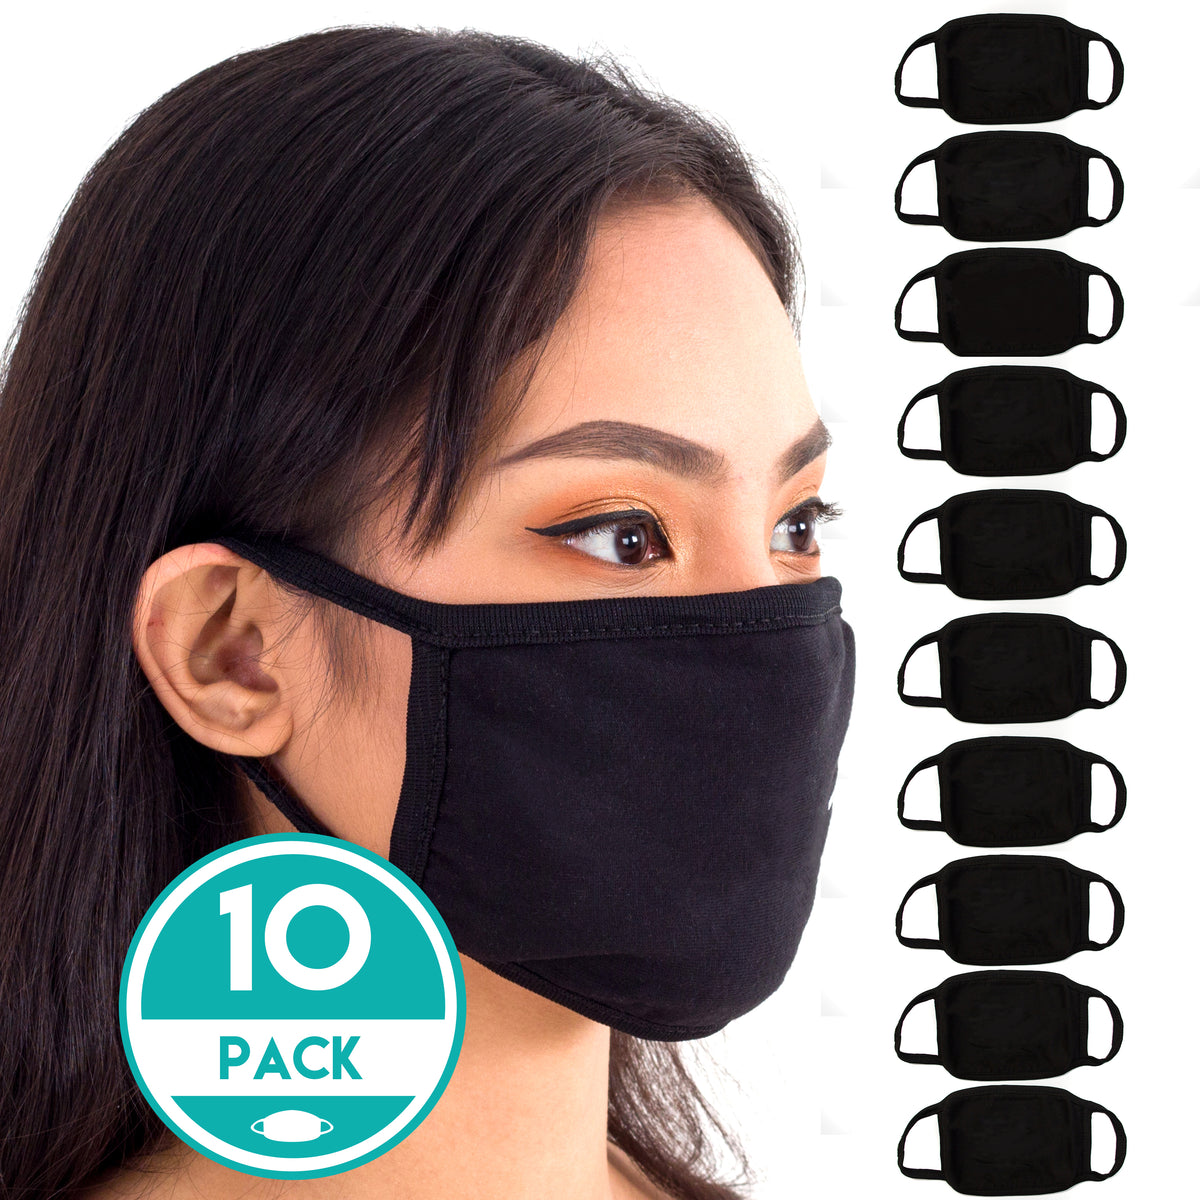 Black Face Mouth Mask - Cotton Face Covering (10 Pack) - Face Mask Resuable, Washable, Breathable, Adjustable